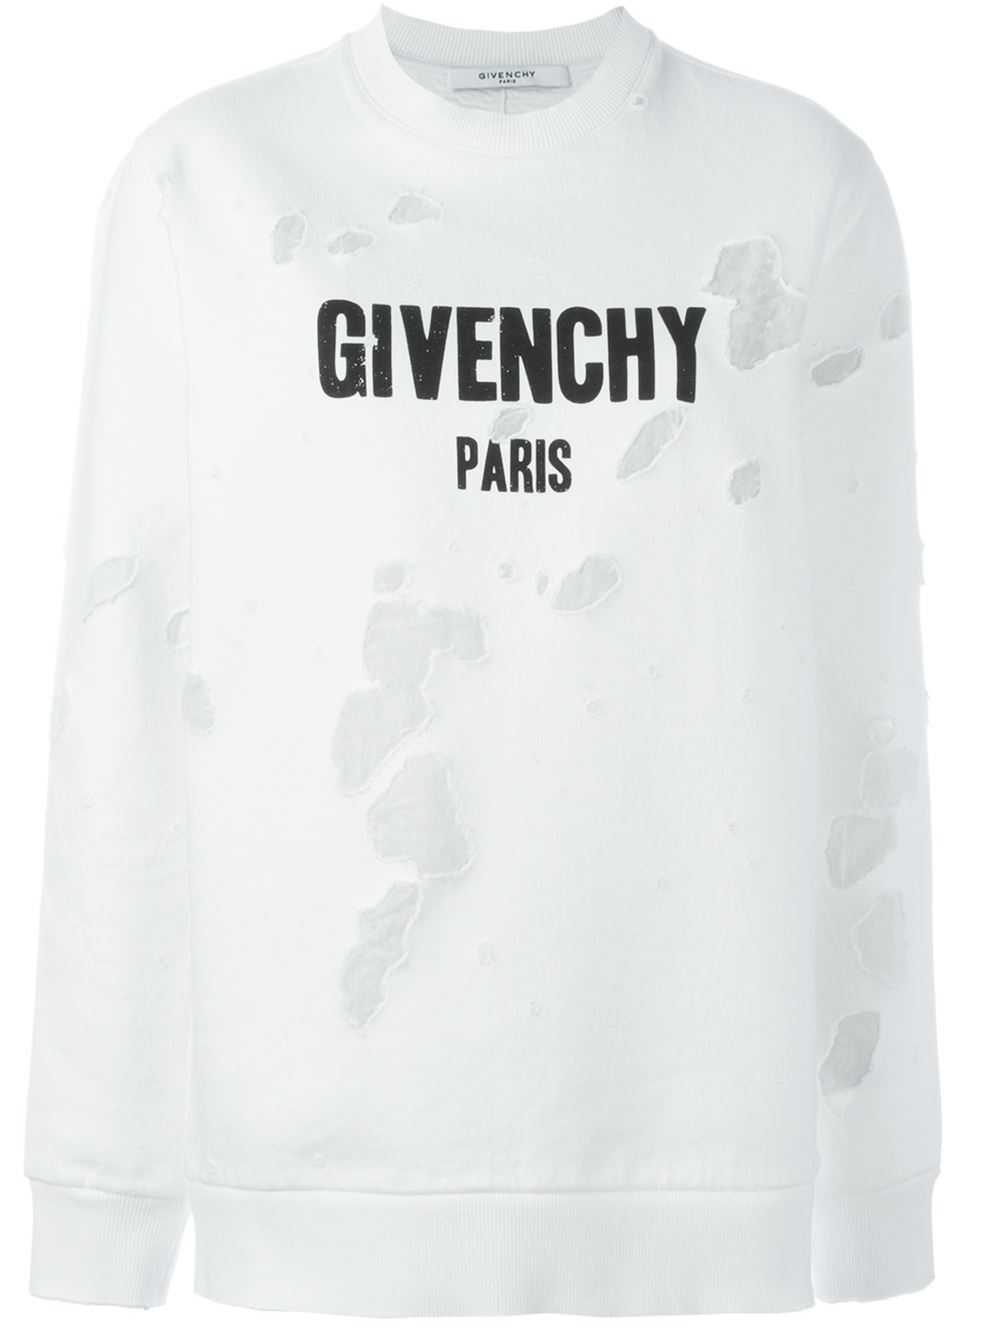 Givenchy Cotton Distressed Sweatshirt in White - Lyst